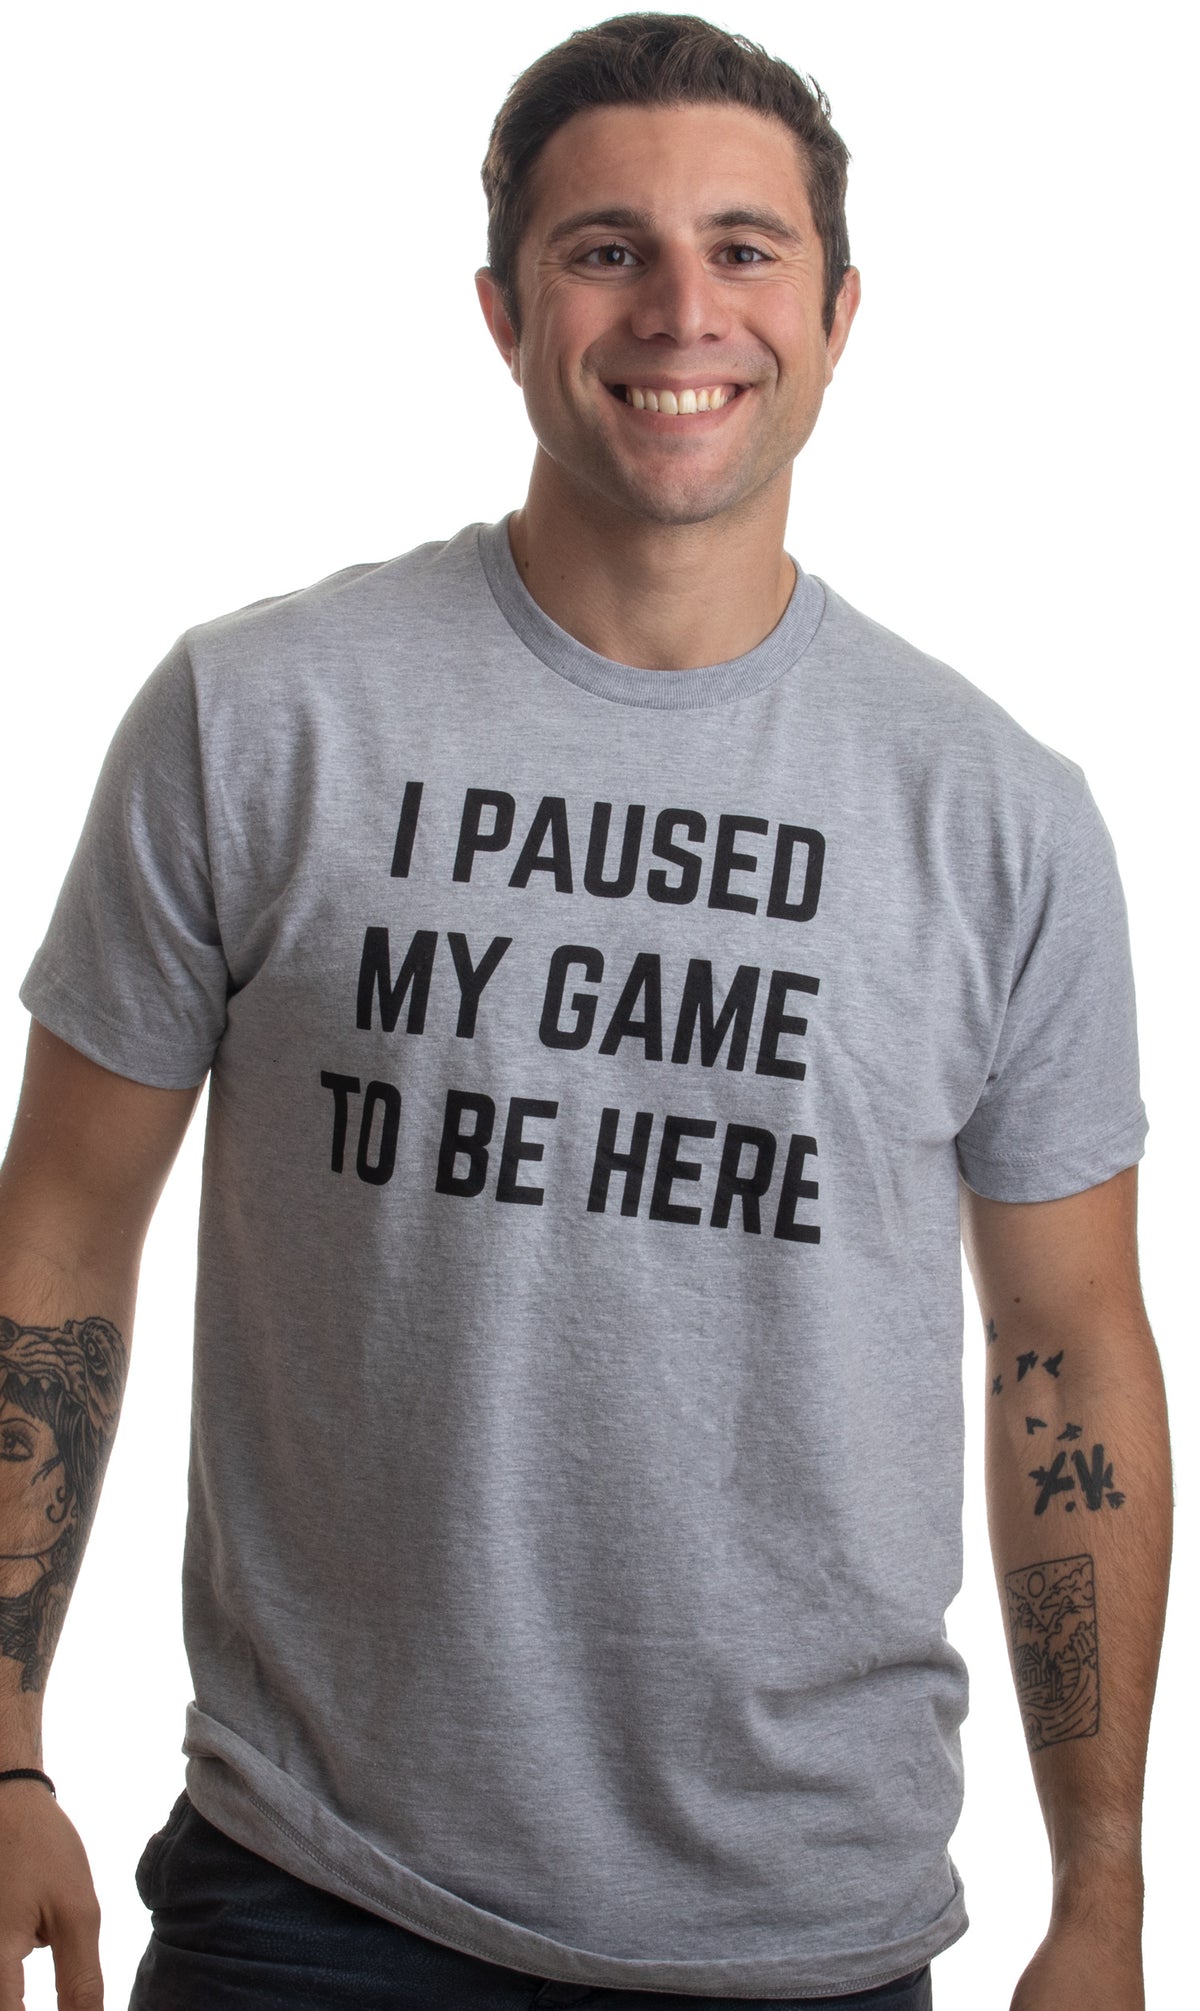 I Paused my Game to Be Here | Funny Video Gamer Gaming Player Humor Joke for Men Women T-shirt